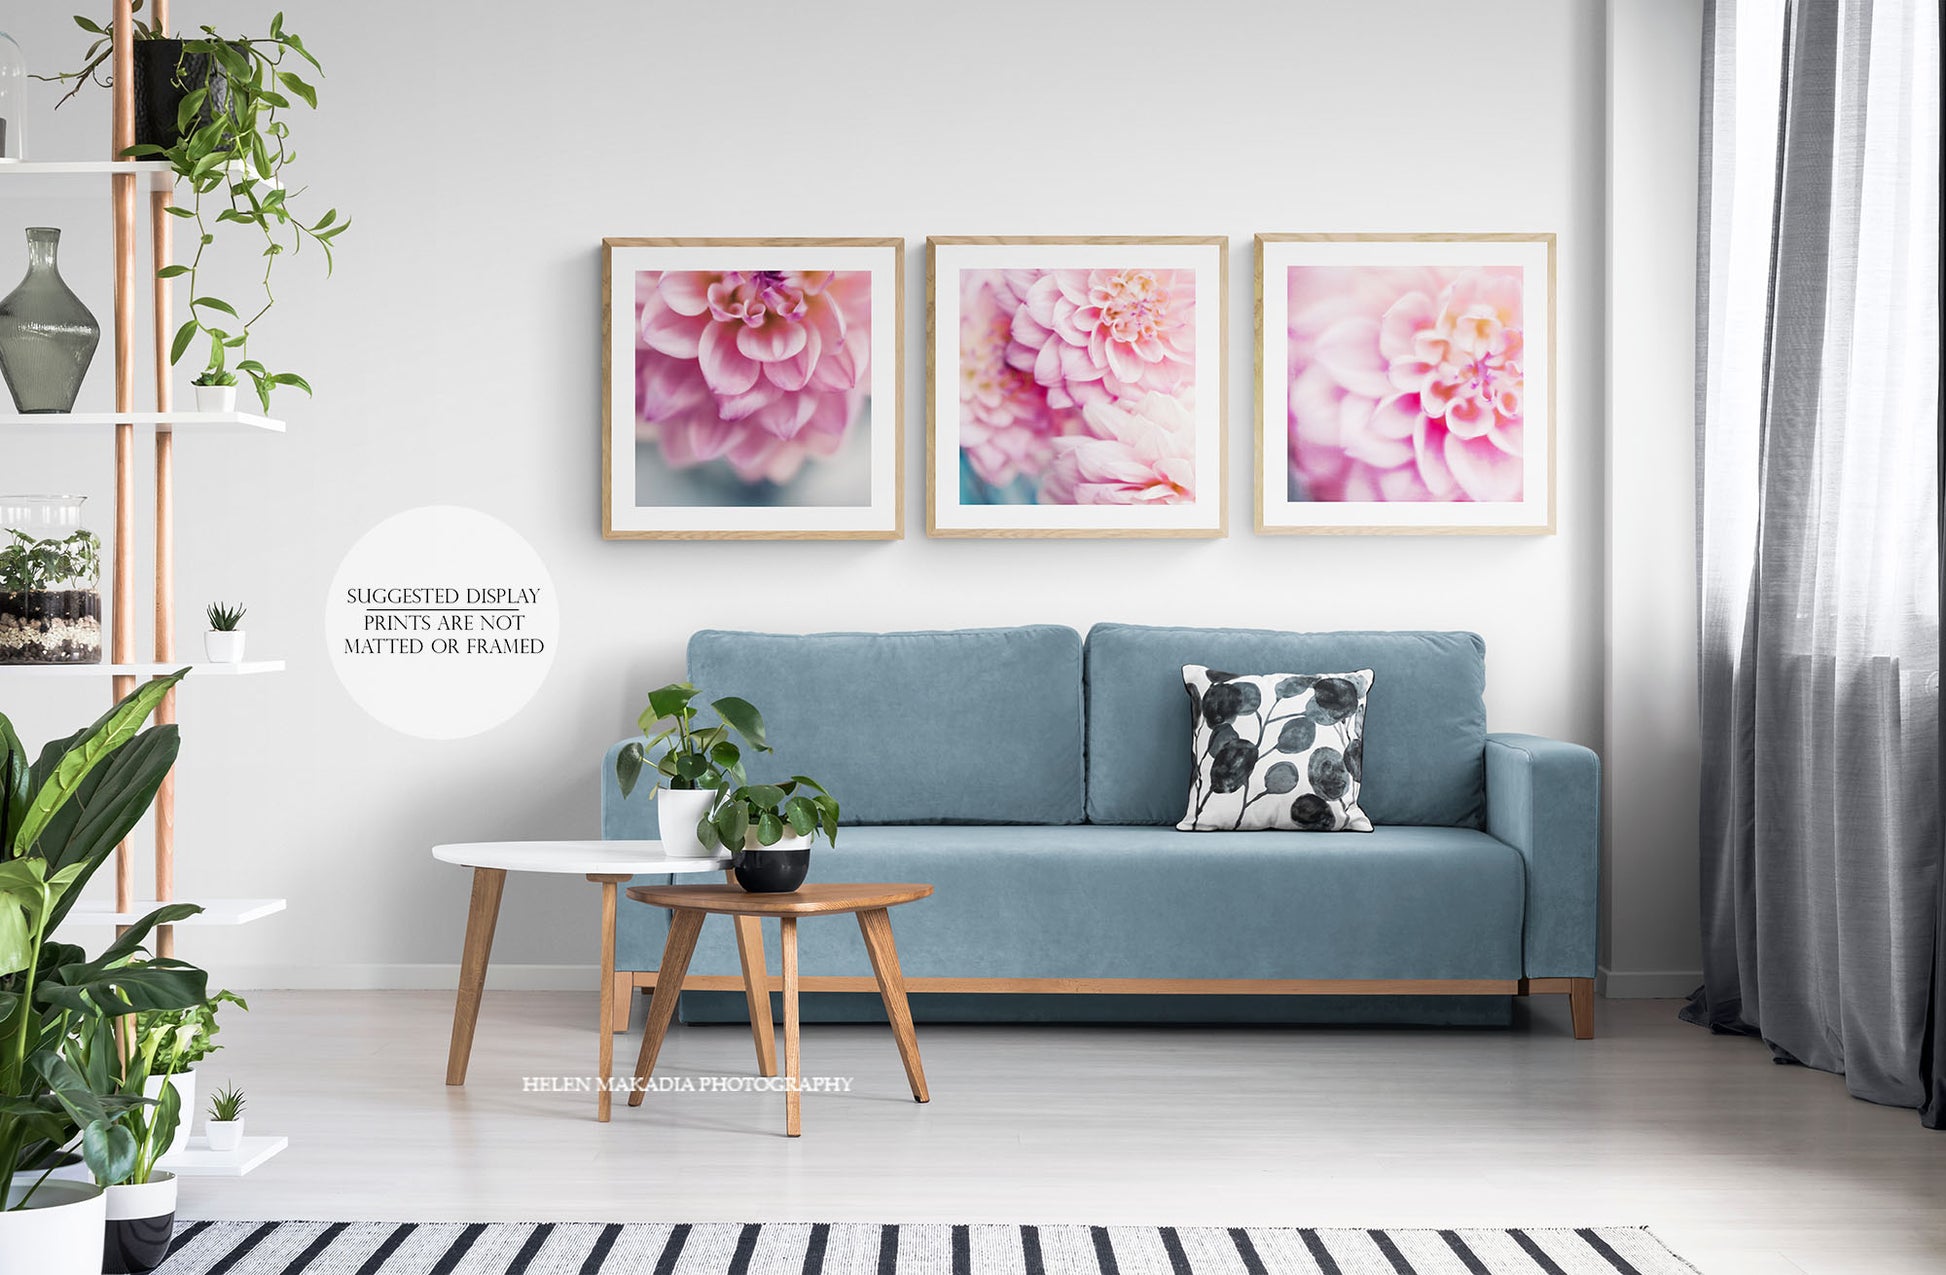 Three Dahlia Photograph as Wall Art Prints Framed as Suggested Display in a Living Room